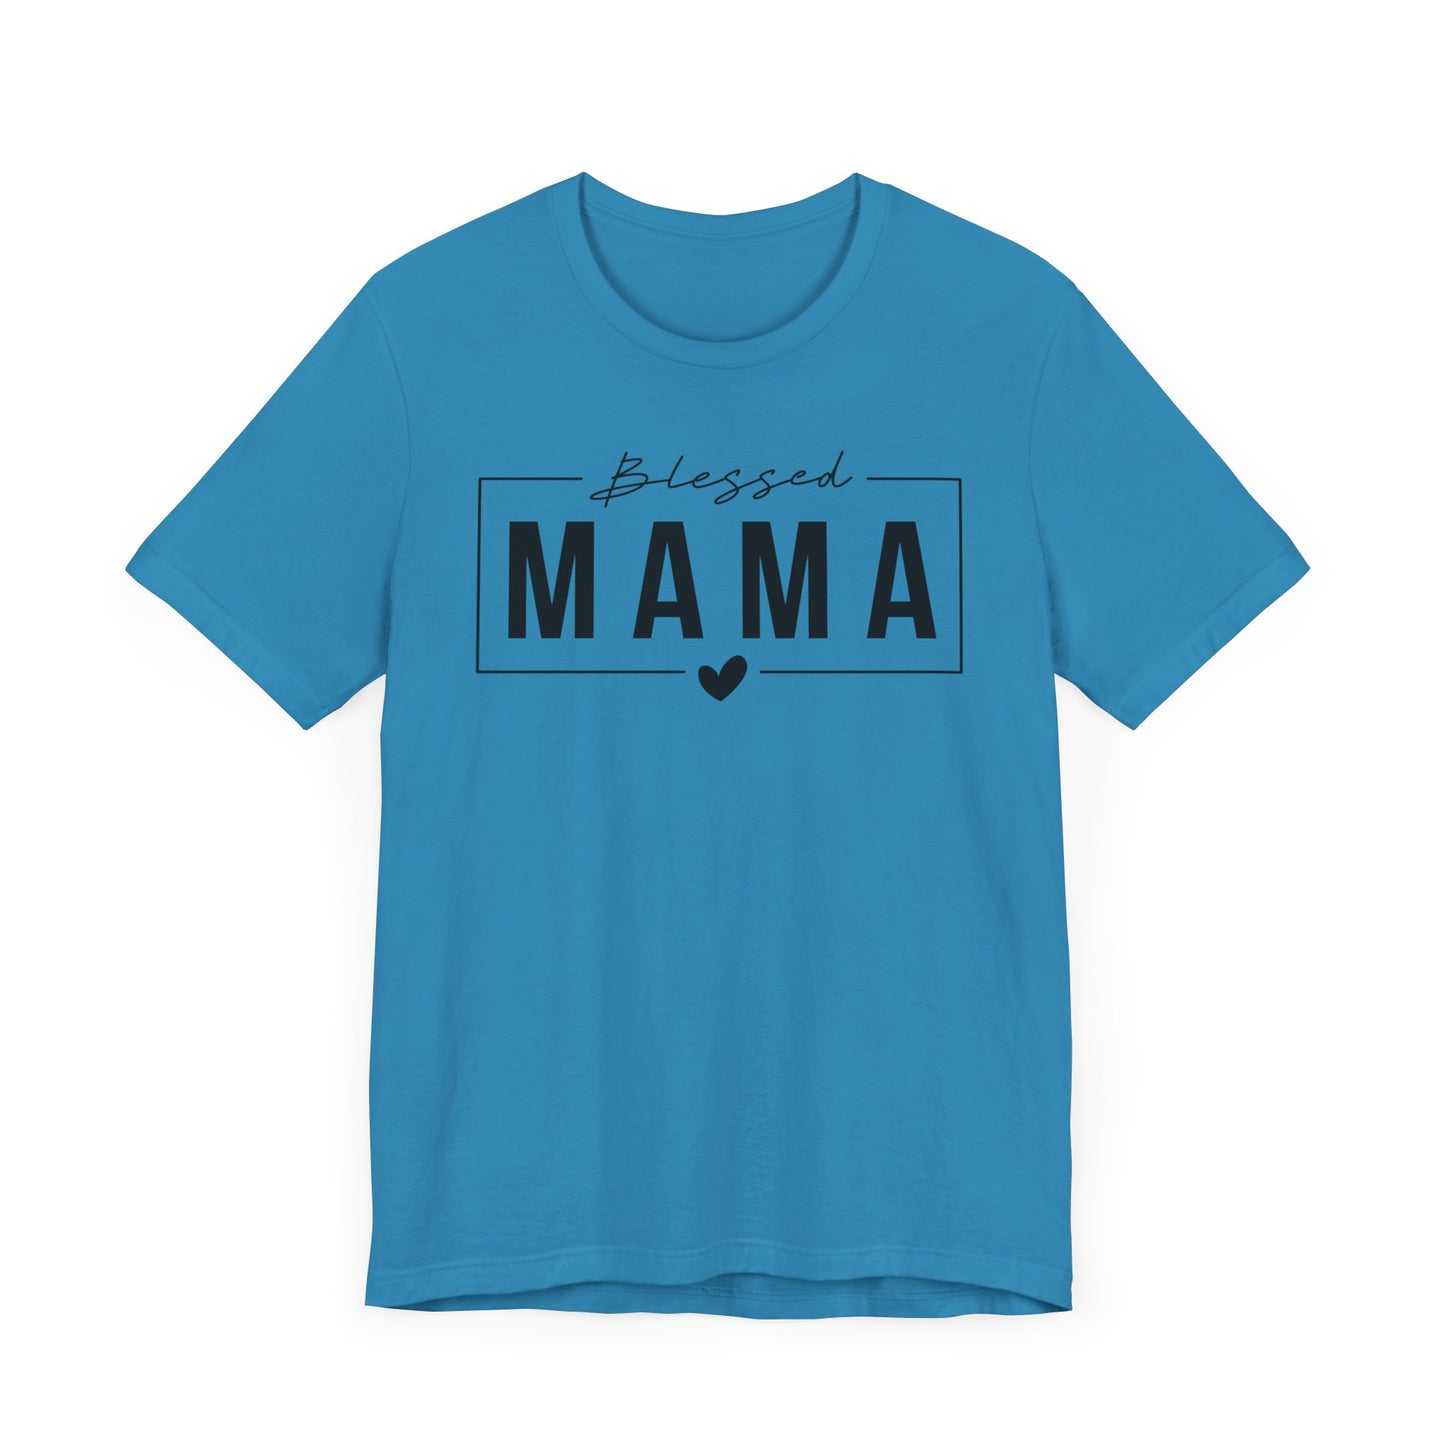 Blessed Mama - Jersey Short Sleeve T-Shirt